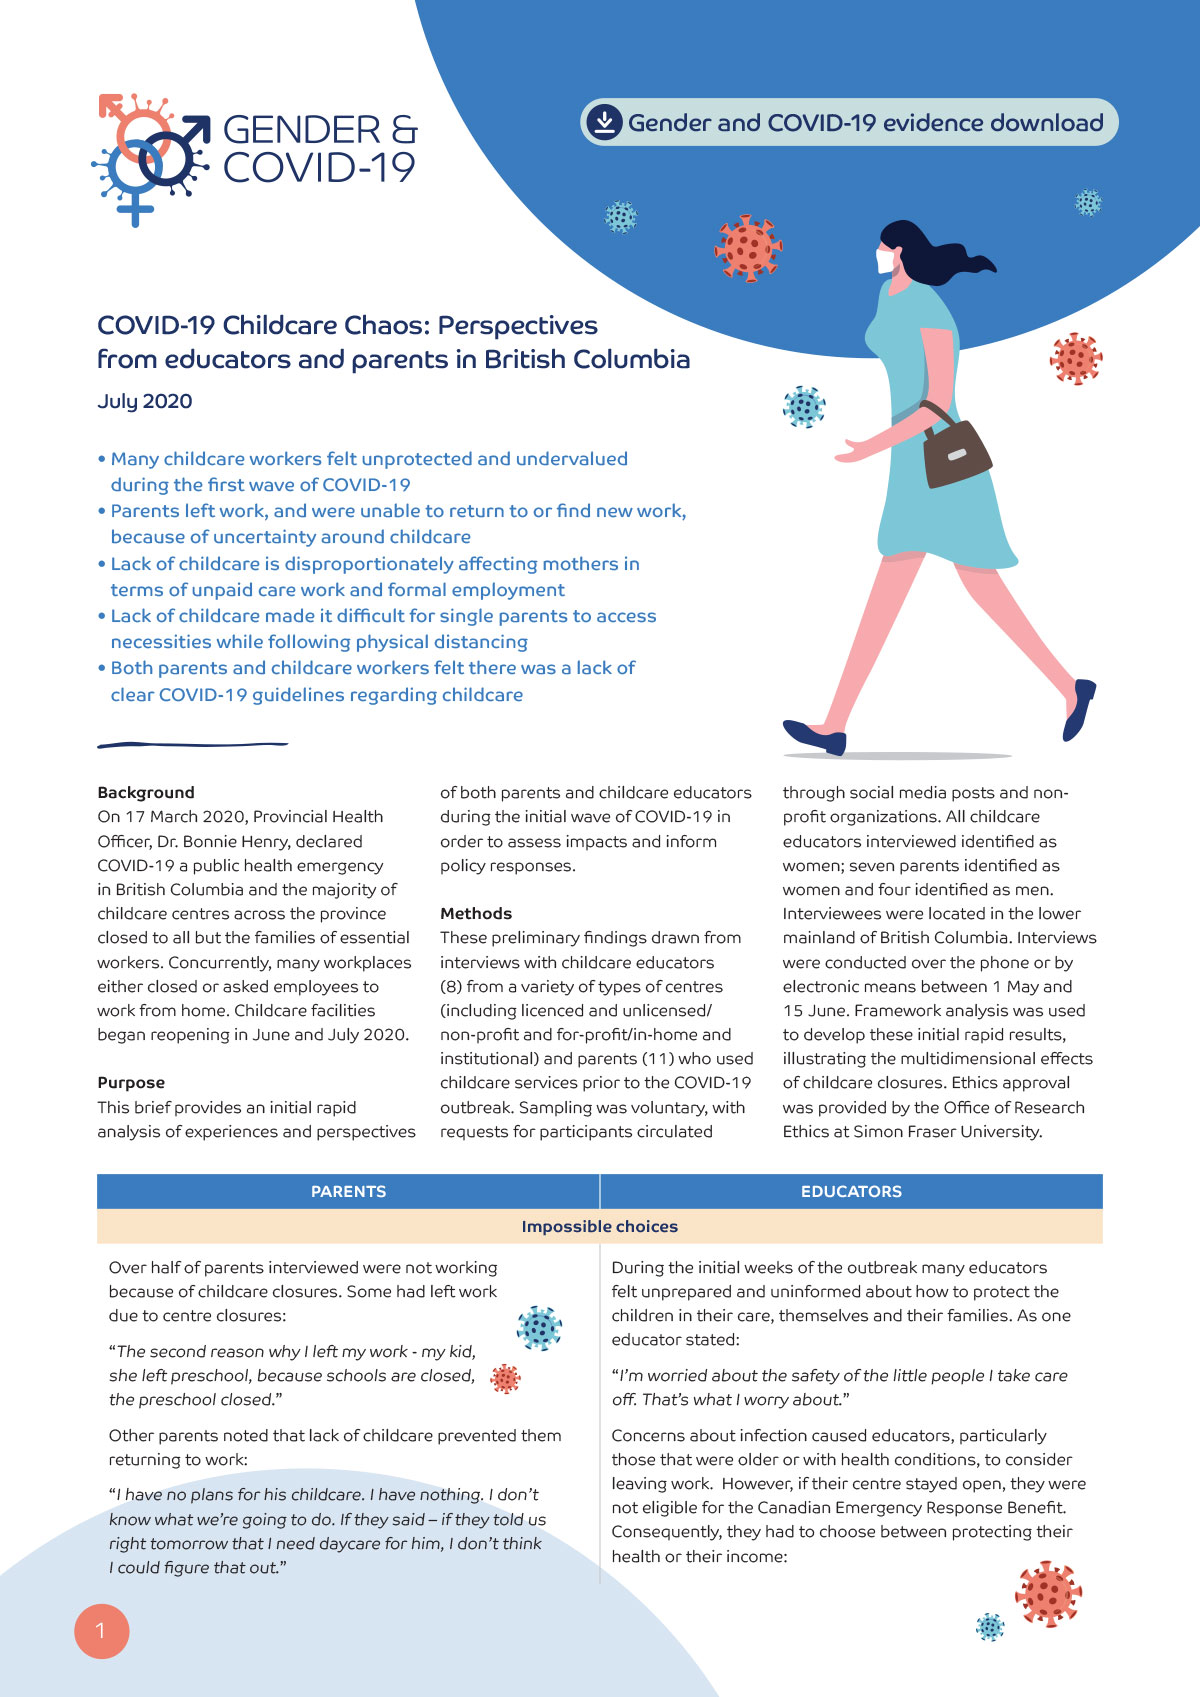 COVID-19 Childcare Chaos: Perspectives from educators and parents in British Columbia